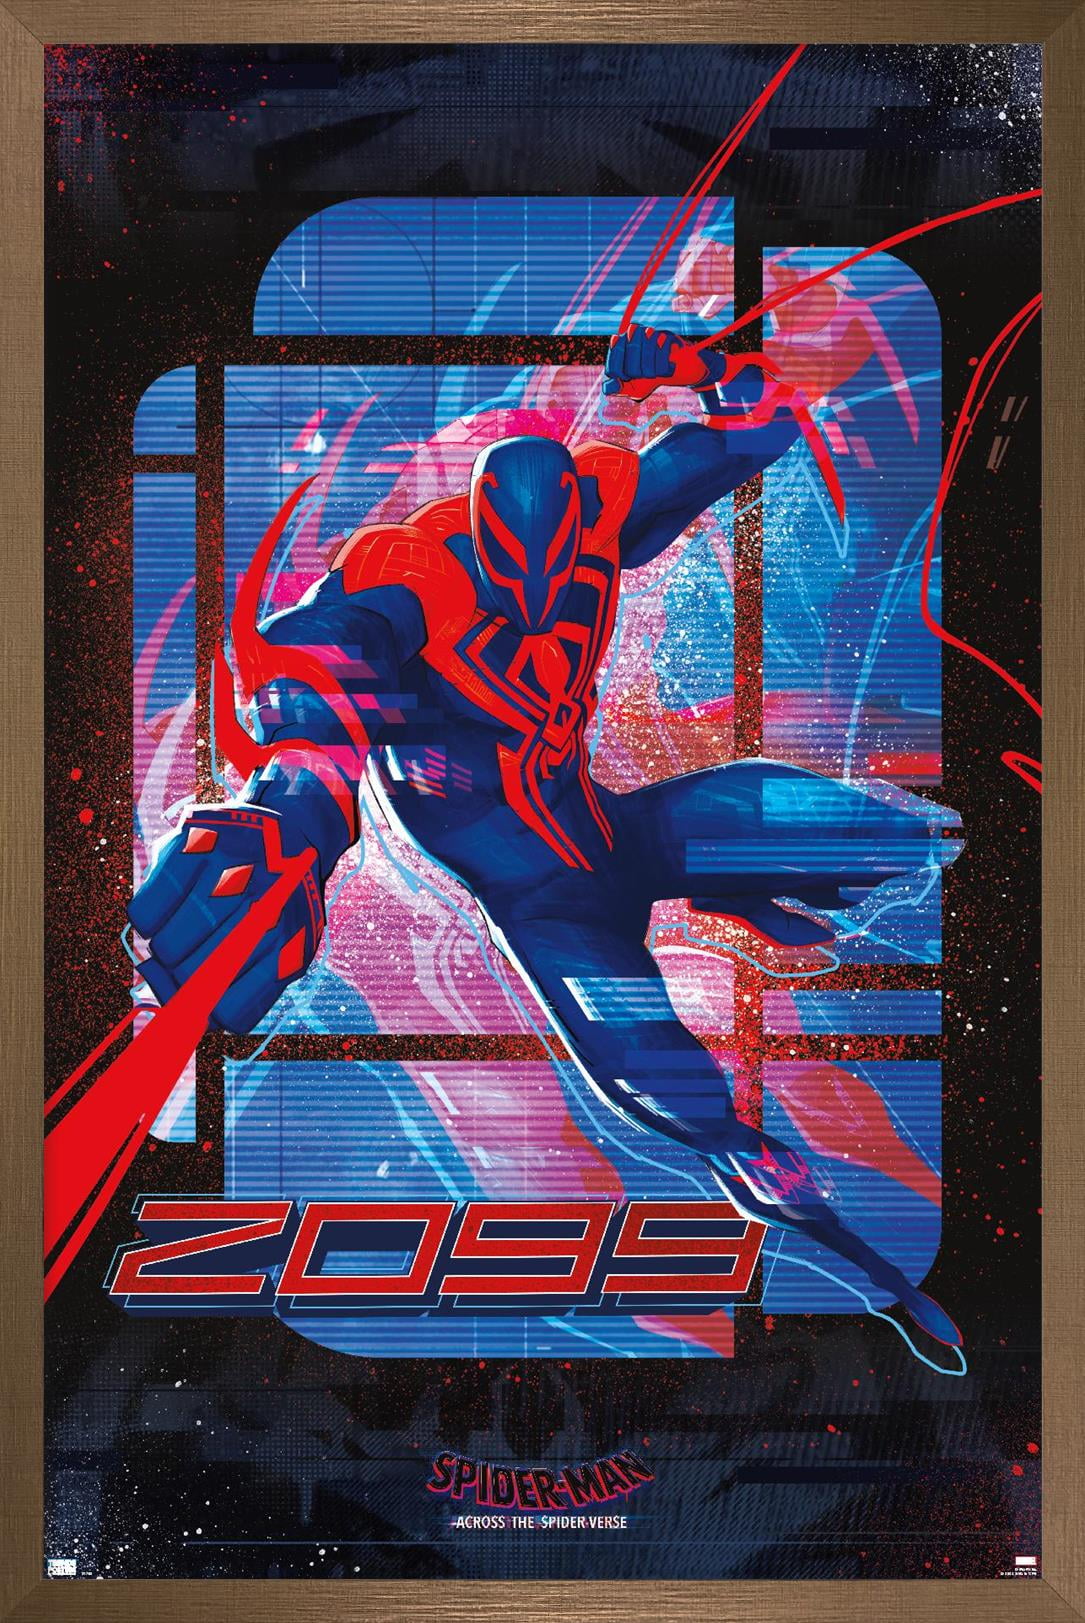 Spiderman Across The Spider-Verse movie poster (d) - Spiderman poster - 11  x 17, spider man across the spider verse poster 